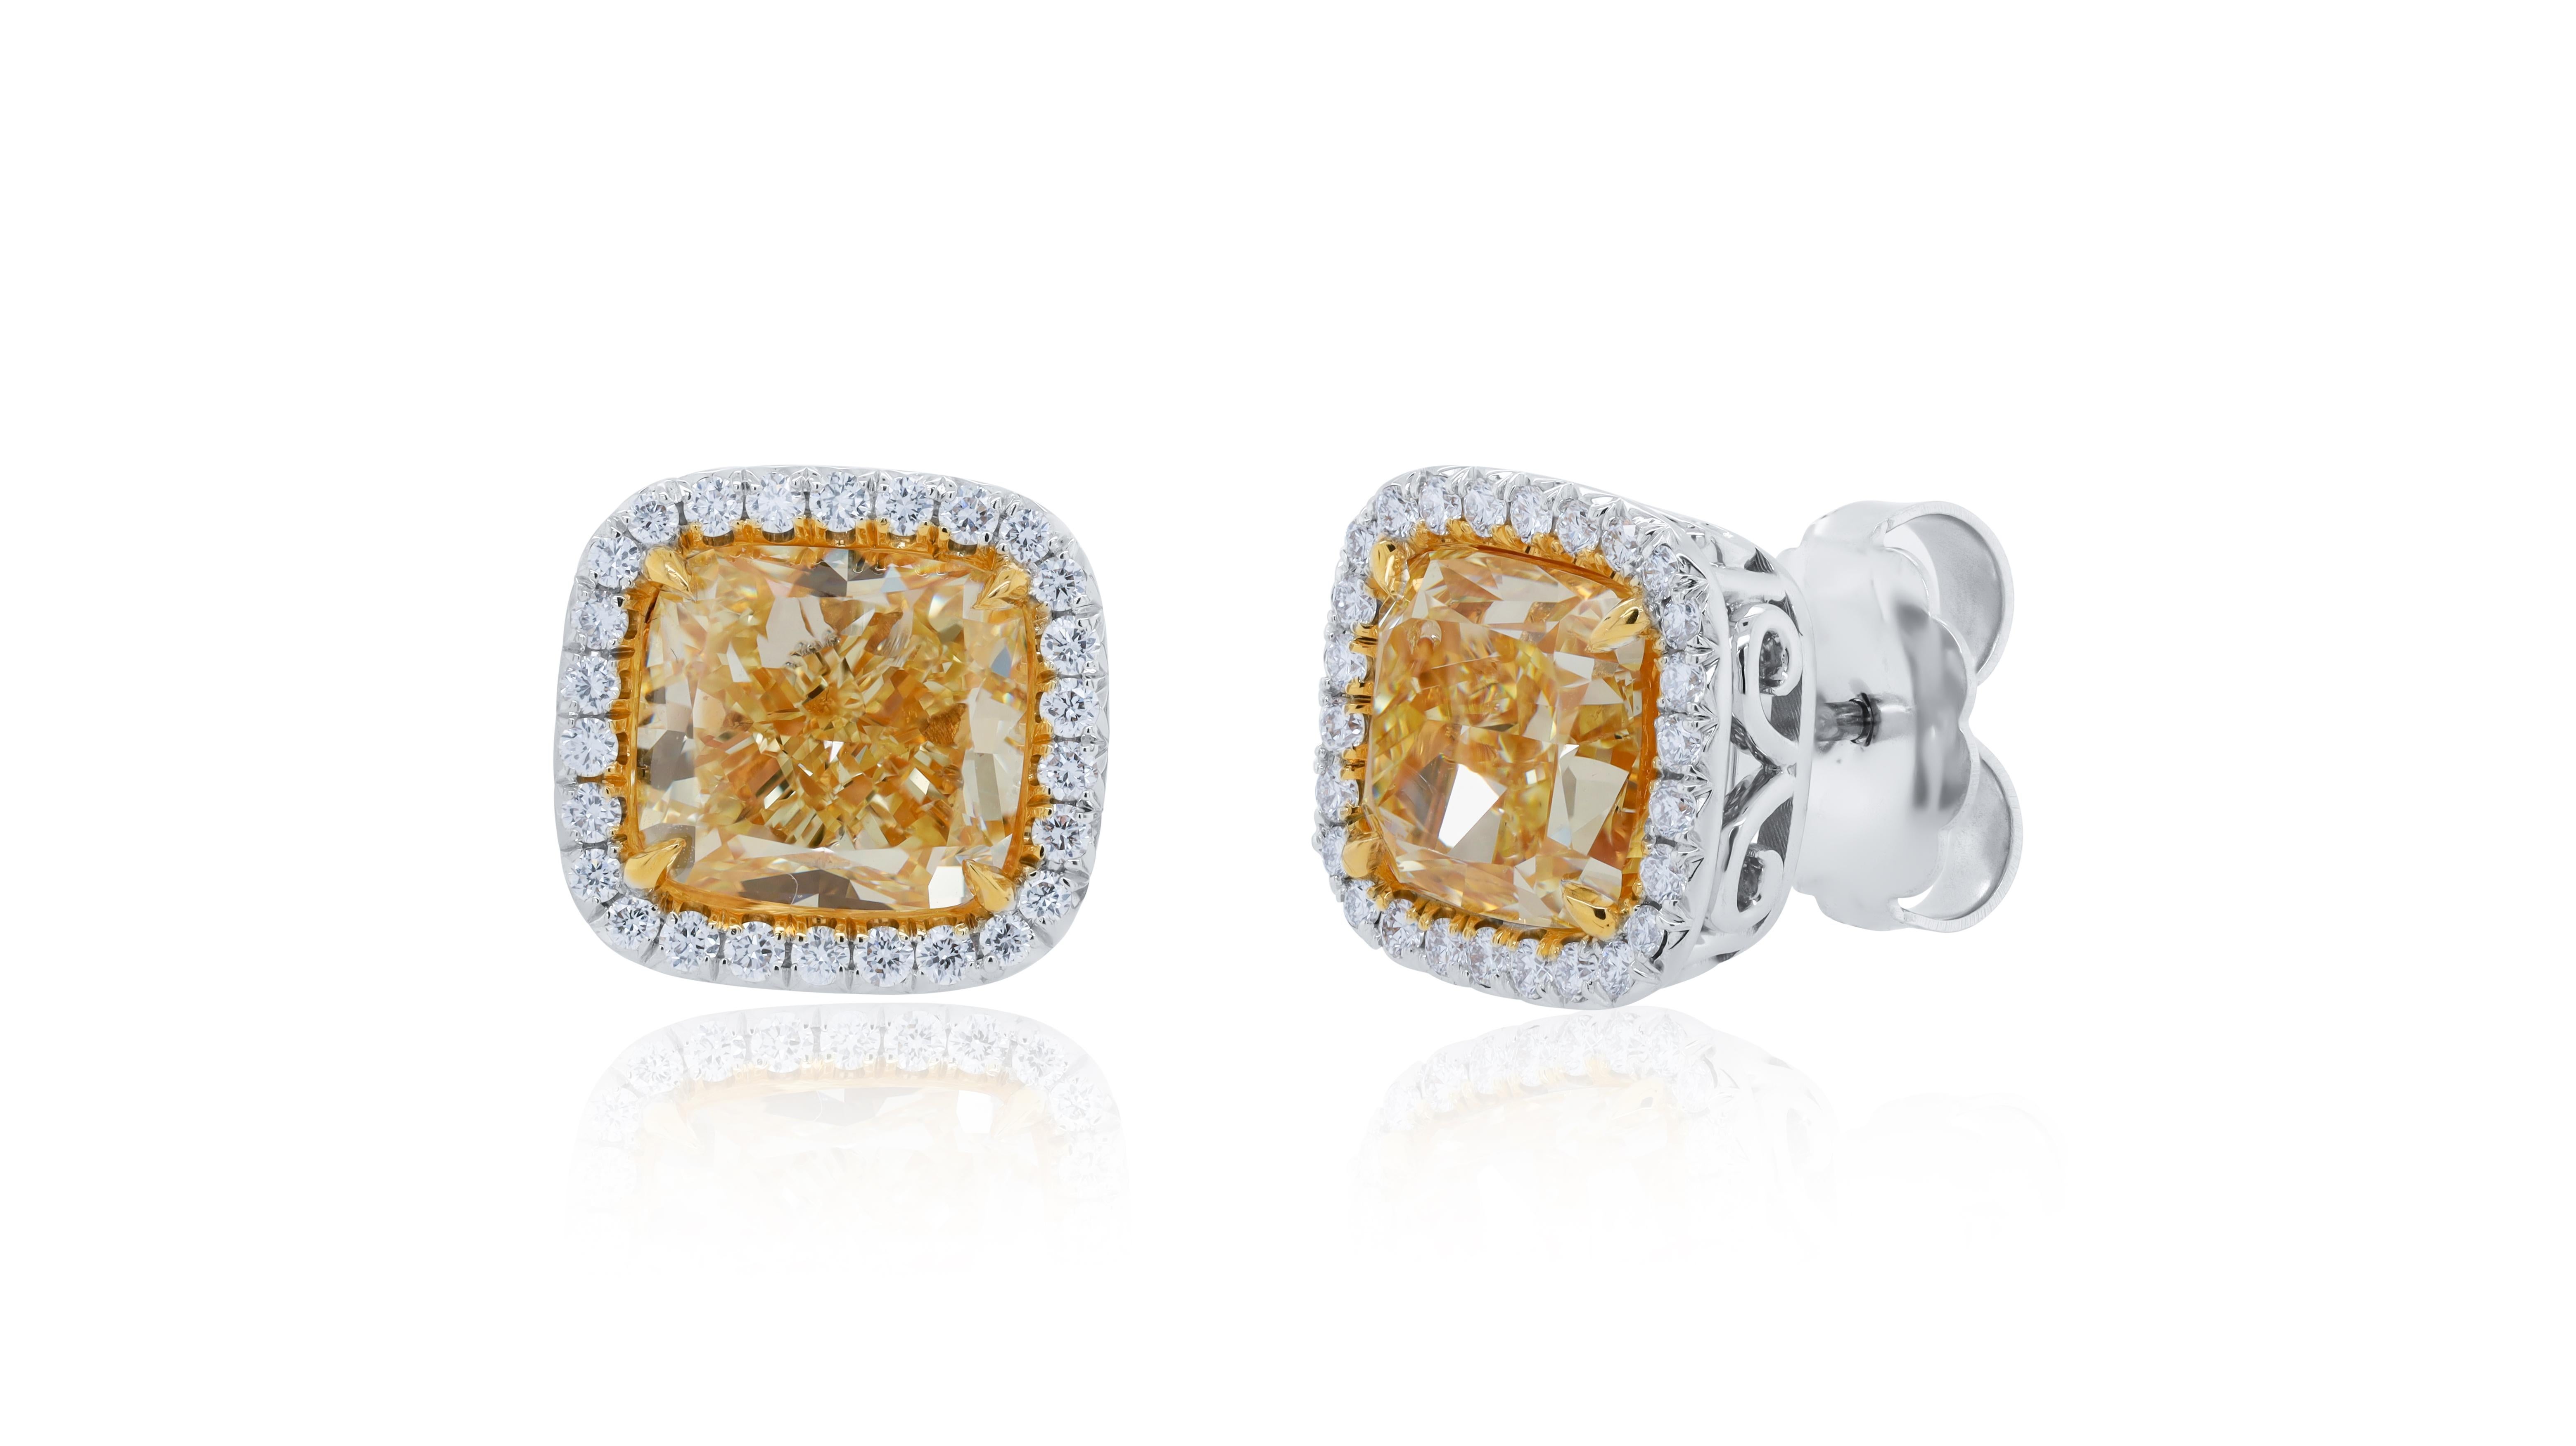 Modern Diana M. 18KT Platinum Diamond studs, features 4.00 + 4.02ct  FY-VS1 GIA For Sale